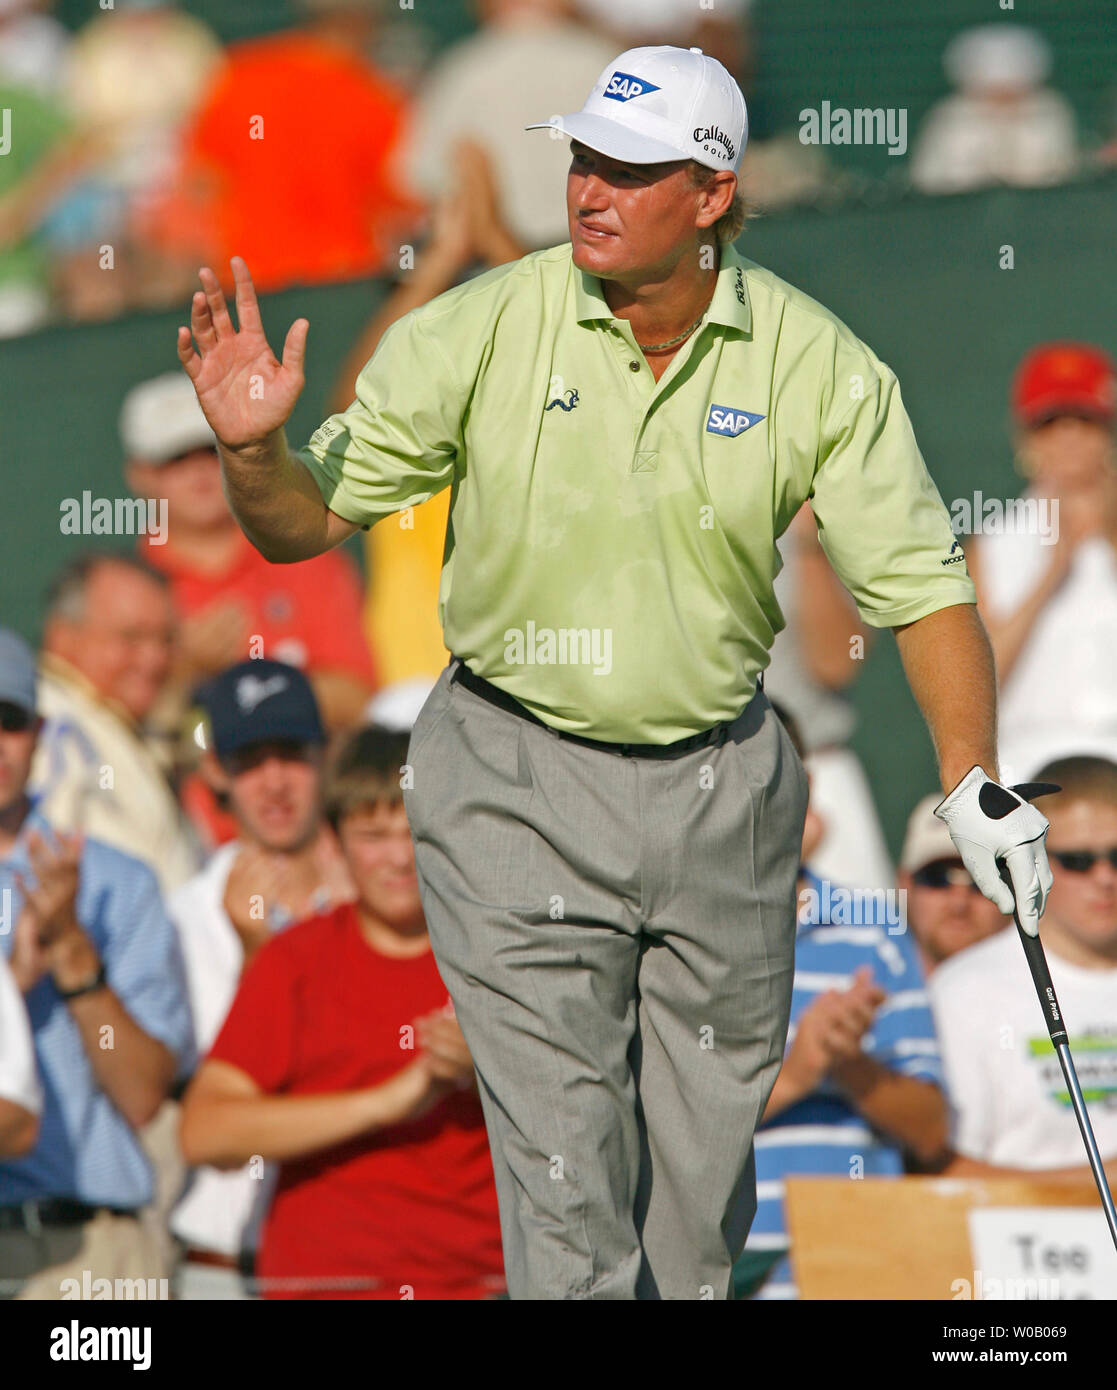 South Africa's Ernie Els acknowledges his introduction before beginning first round play at the 89th PGA Championship at Southern Hills Country Club in Tulsa, Oklahoma on August 9, 2007.   (UPI Photo/Gary C. Caskey Stock Photo